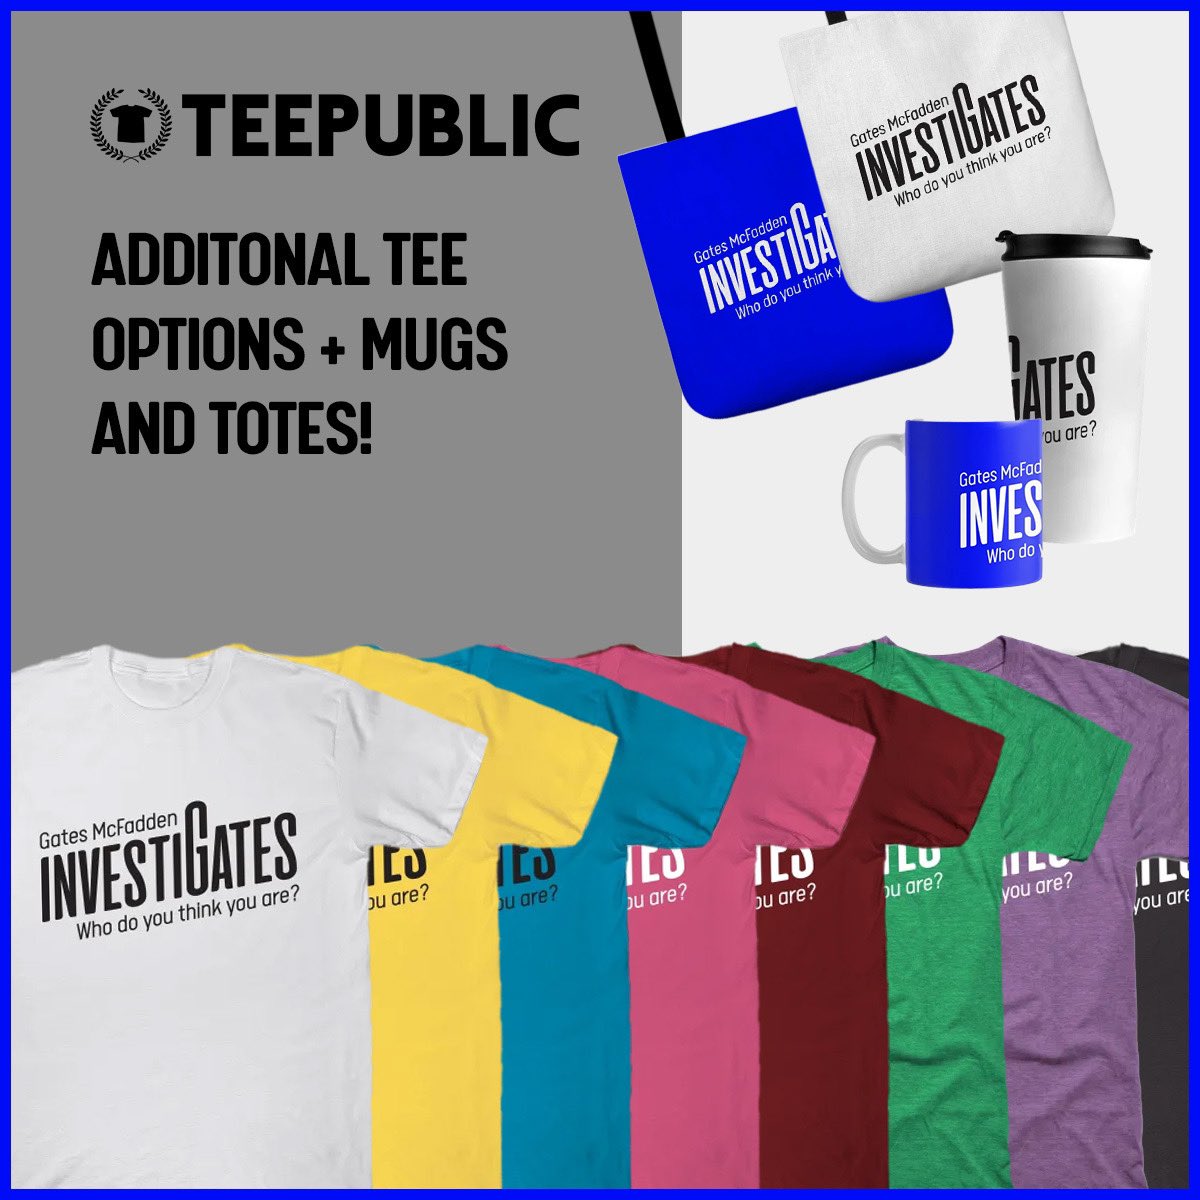 Hey everybody! Head on over to Gates’ store on TeePublic to check out the new merchandise for #InvestiGates! 
Mugs, tote bags and new T-shirt colors! 

More to come throughout the year! 

#GatesMcFadden